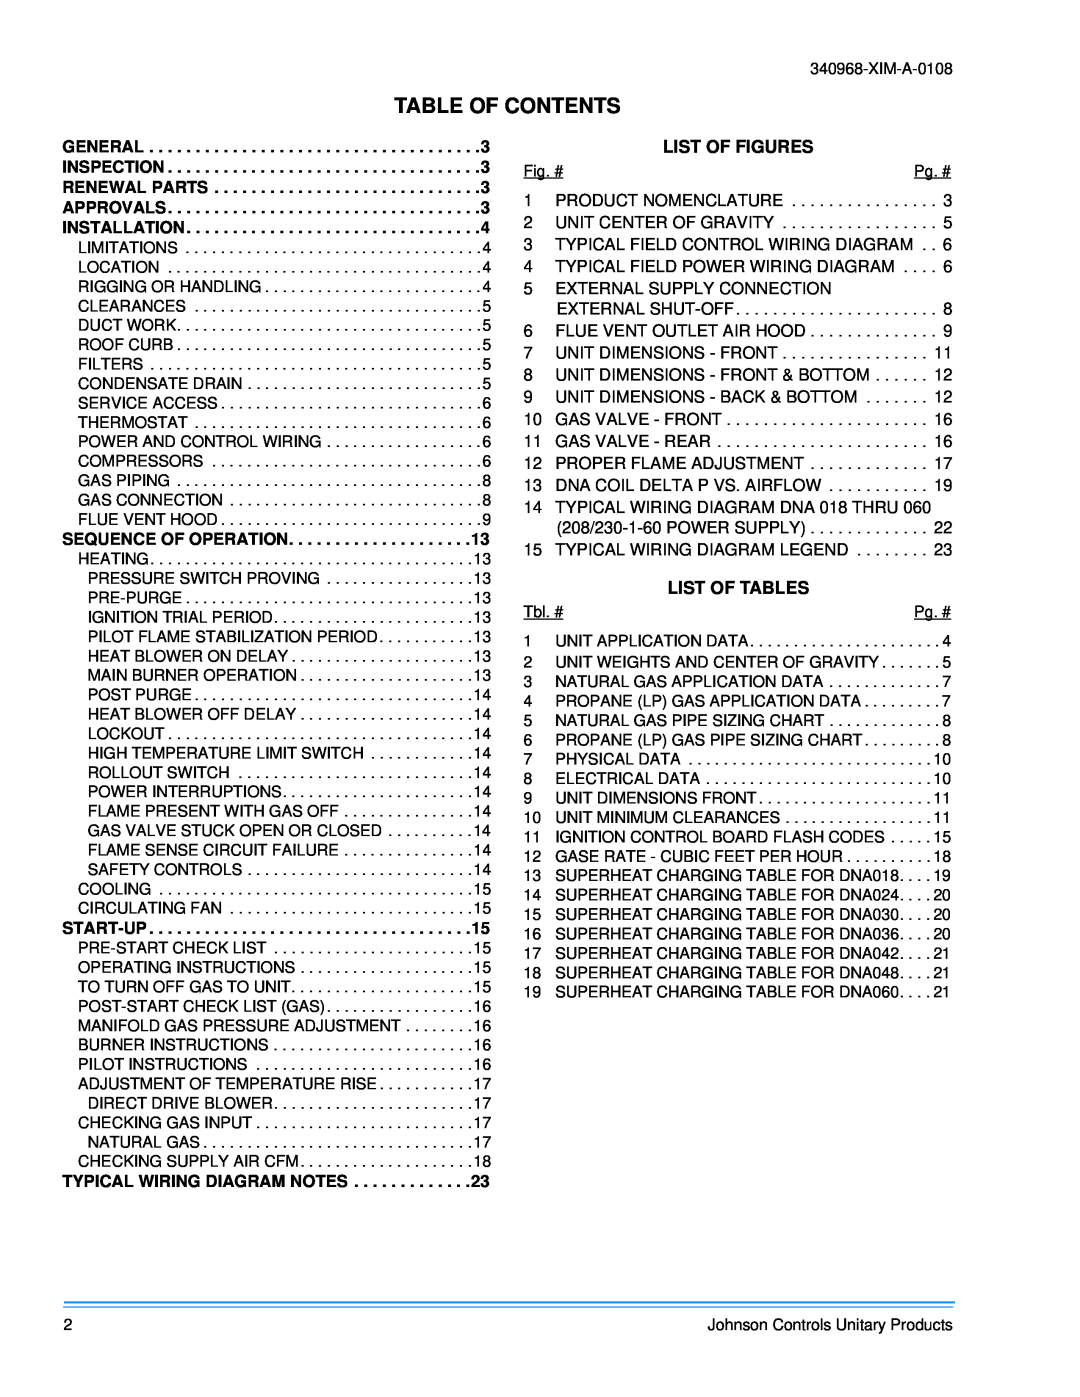 Johnson Controls 340968-XIM-A-0108 installation manual Table Of Contents, List Of Figures, List Of Tables 